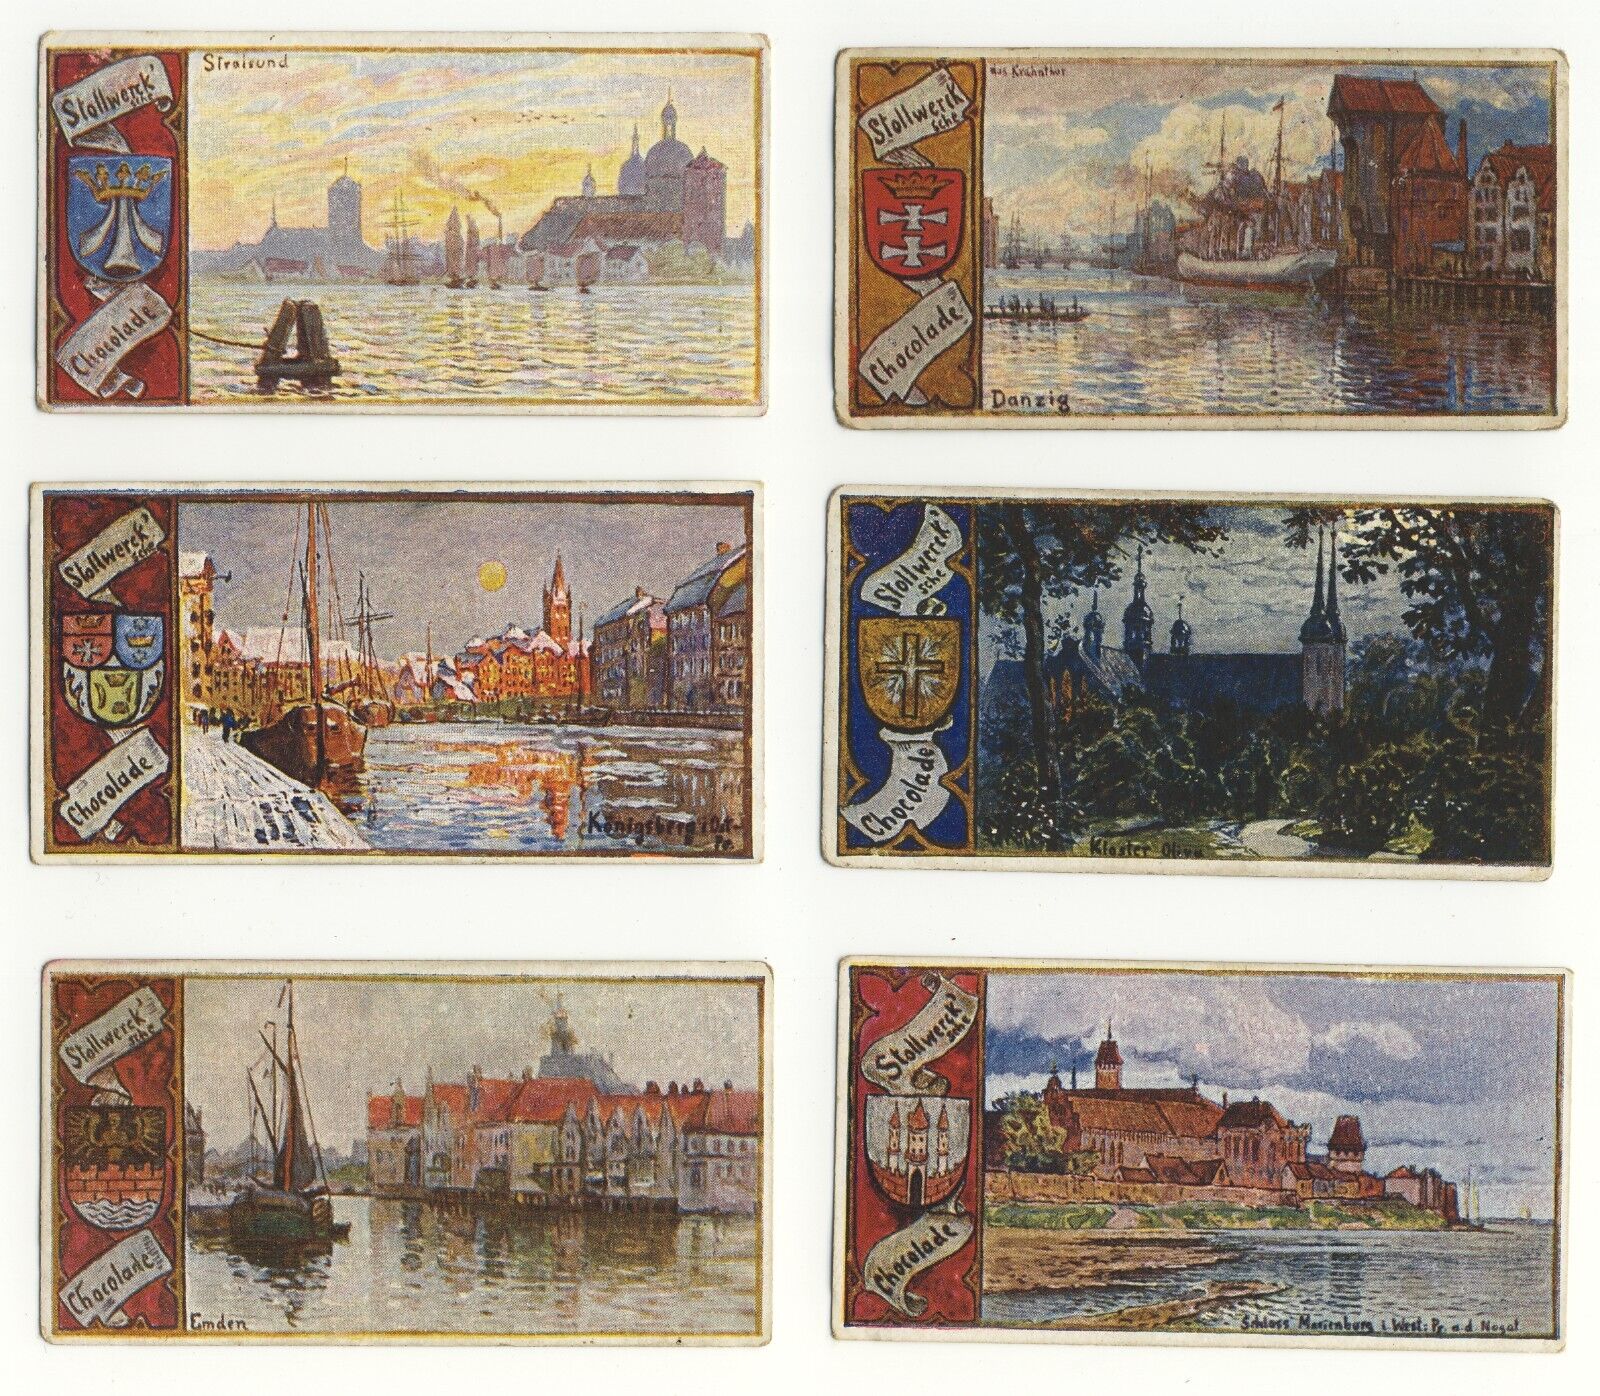 Stollwerck 1900 Group 191 North German Cities set of 6 cards VG